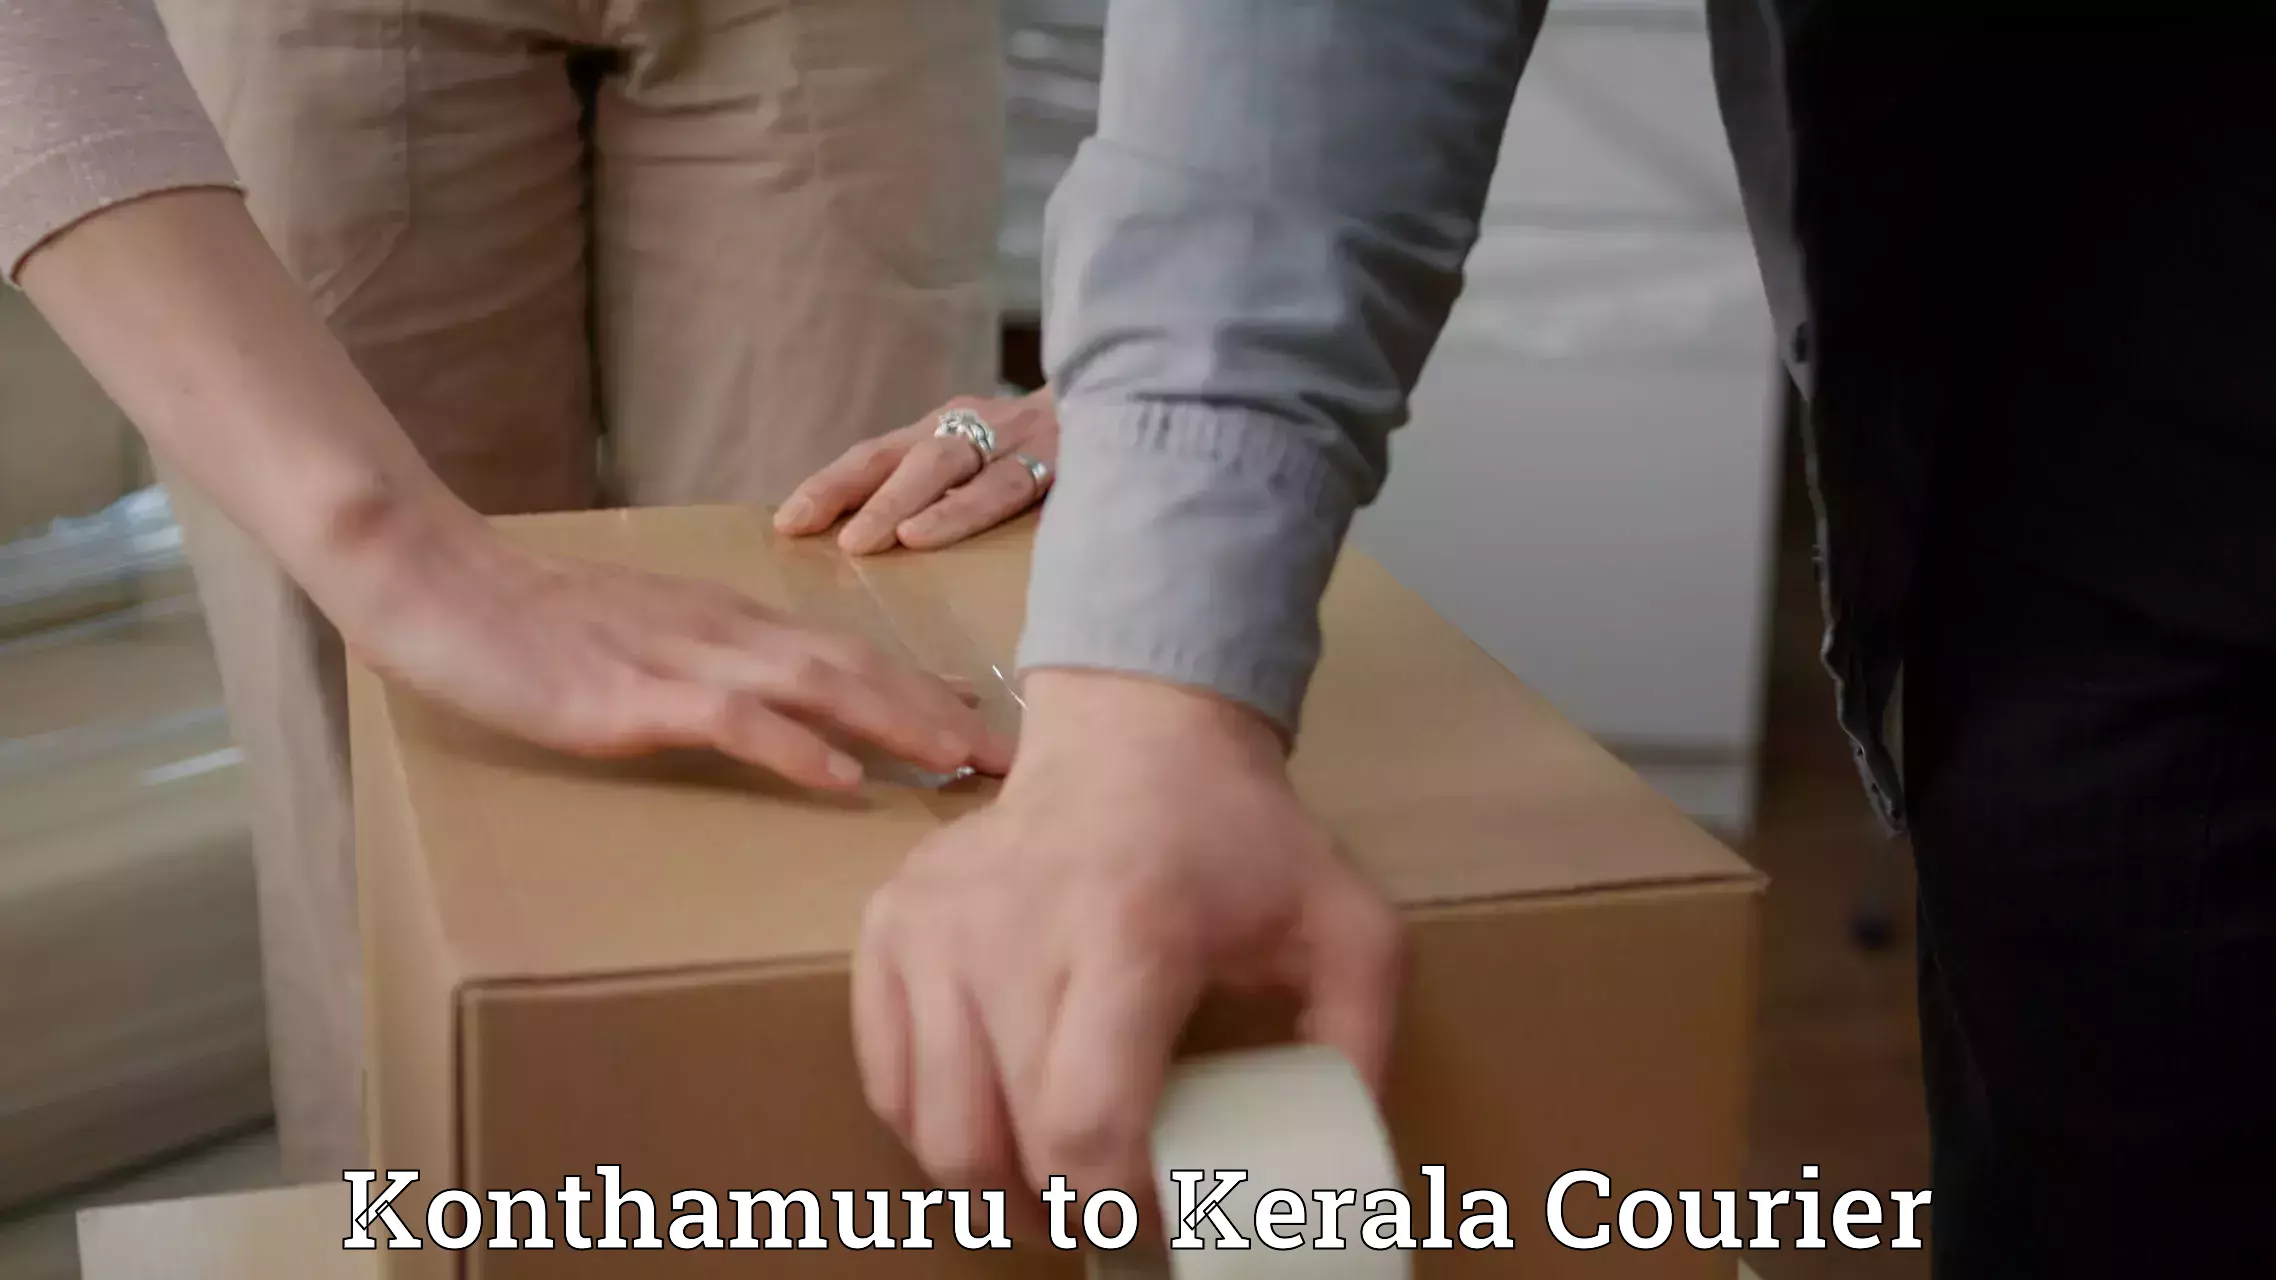 Easy access courier services Konthamuru to Cochin Port Kochi